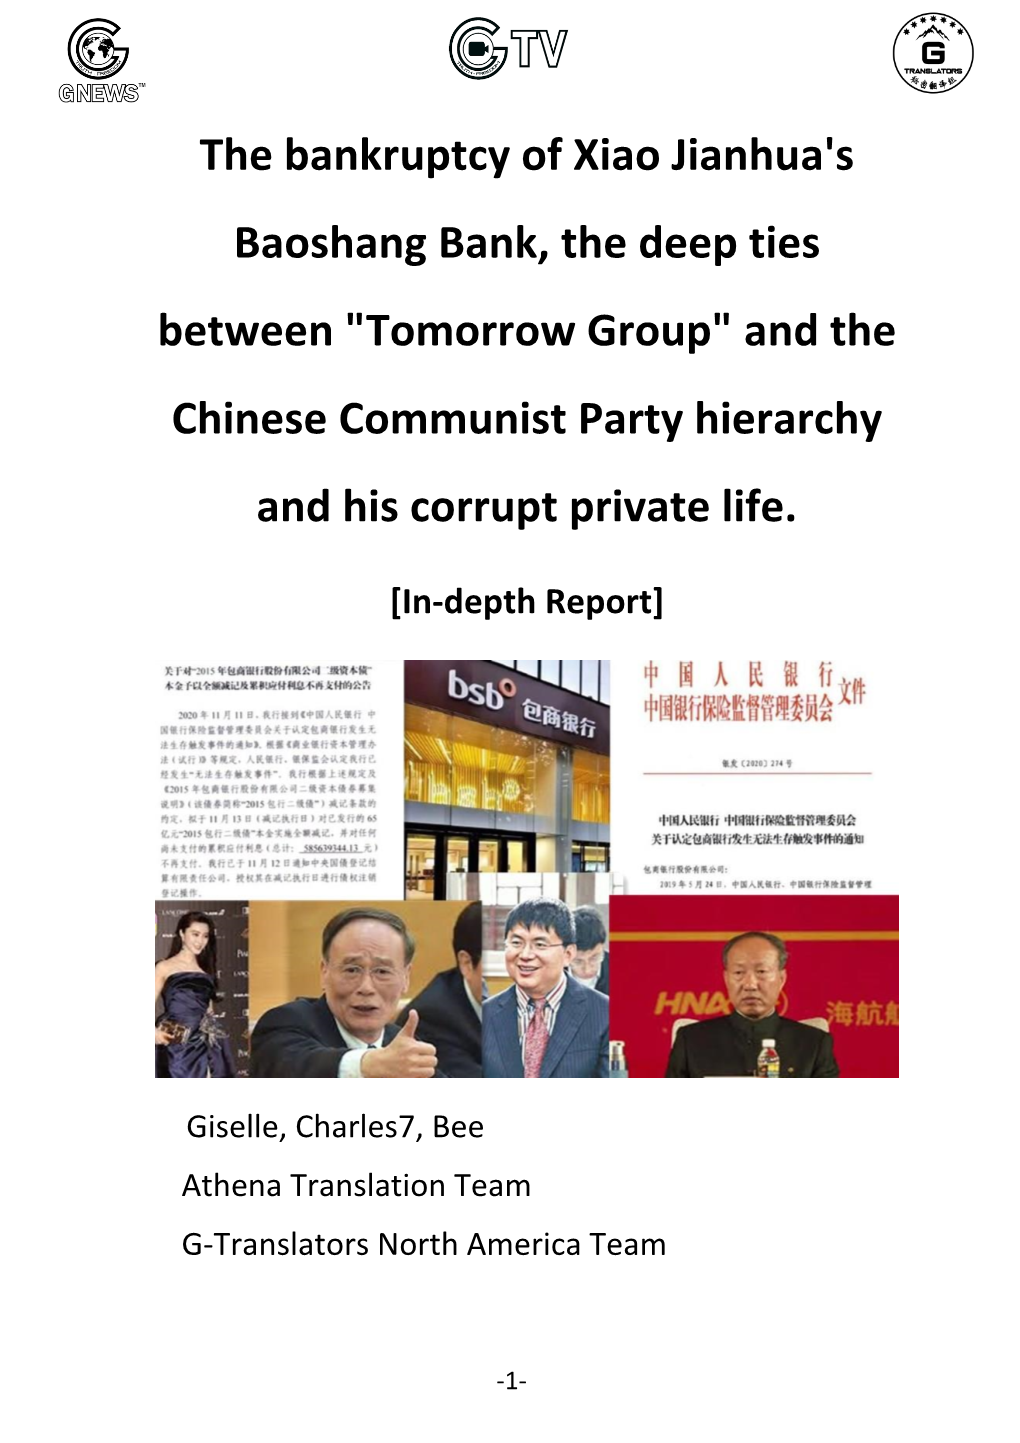 The Bankruptcy of Xiao Jianhua's Baoshang Bank, the Deep Ties Between "Tomorrow Group" and the Chinese Communist Party Hierarchy and His Corrupt Private Life